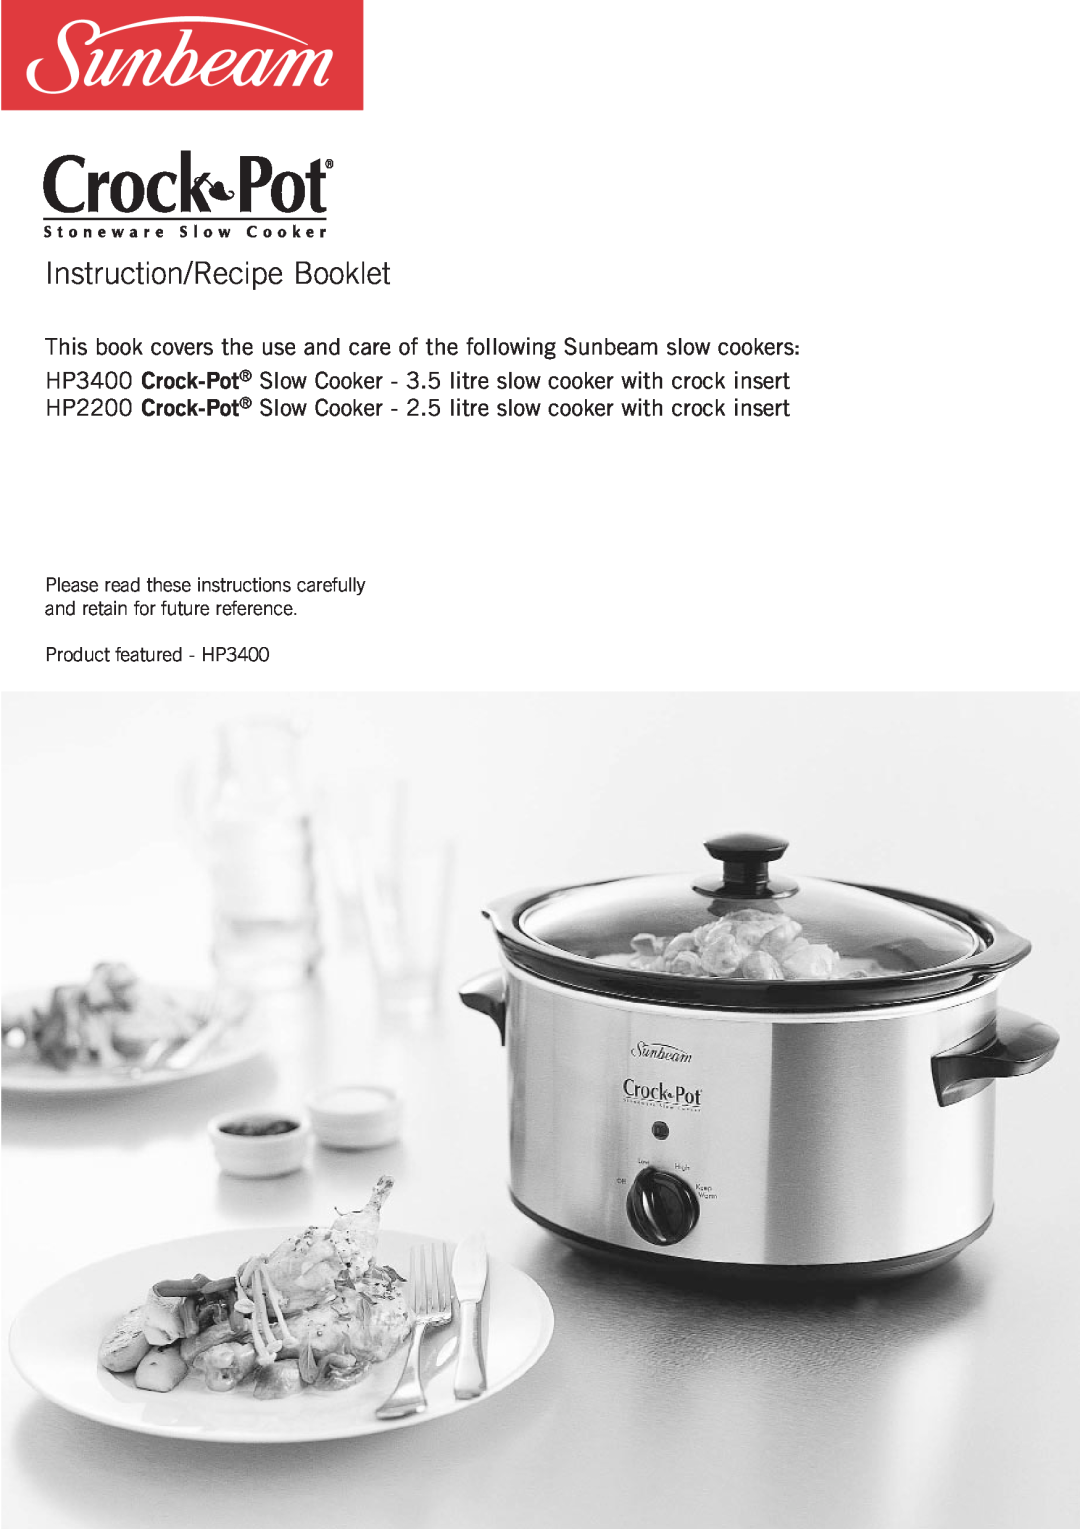 Sunbeam HP2200 manual Instruction/Recipe Booklet, Product featured - HP3400 